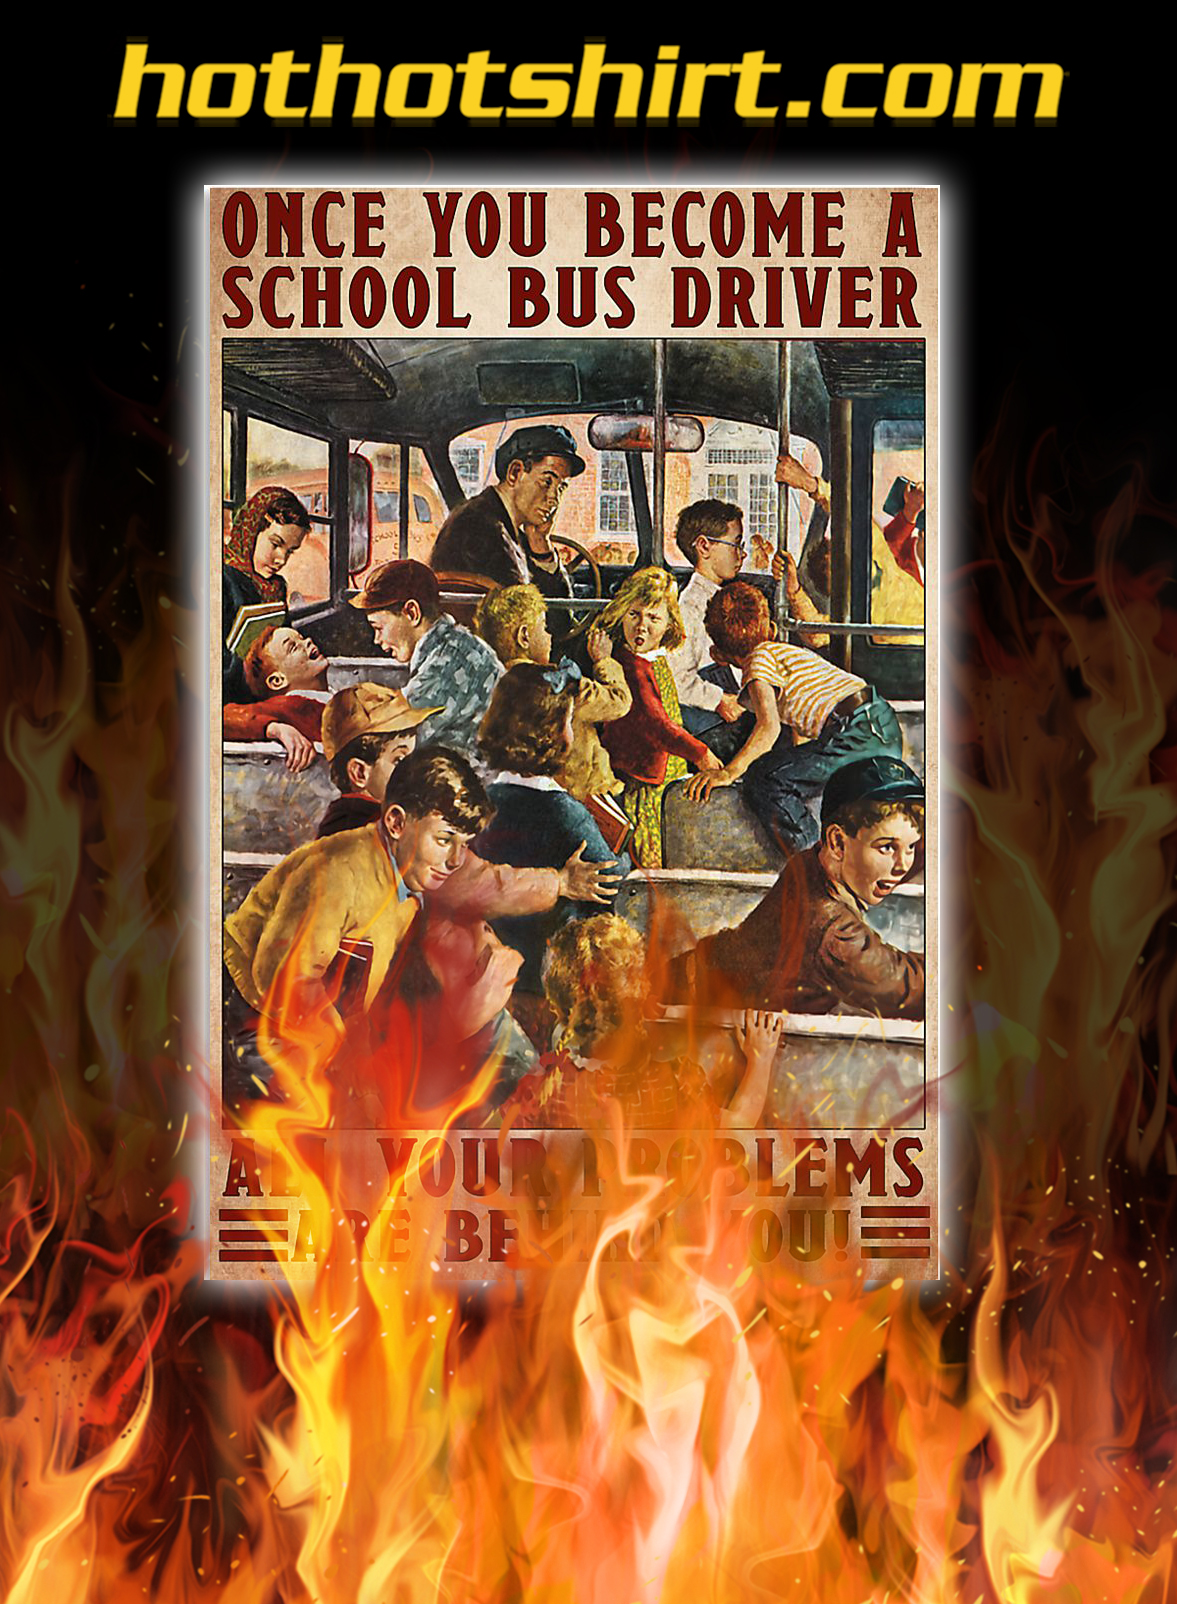 Once you become a school bus driver all your problems are behind you poster